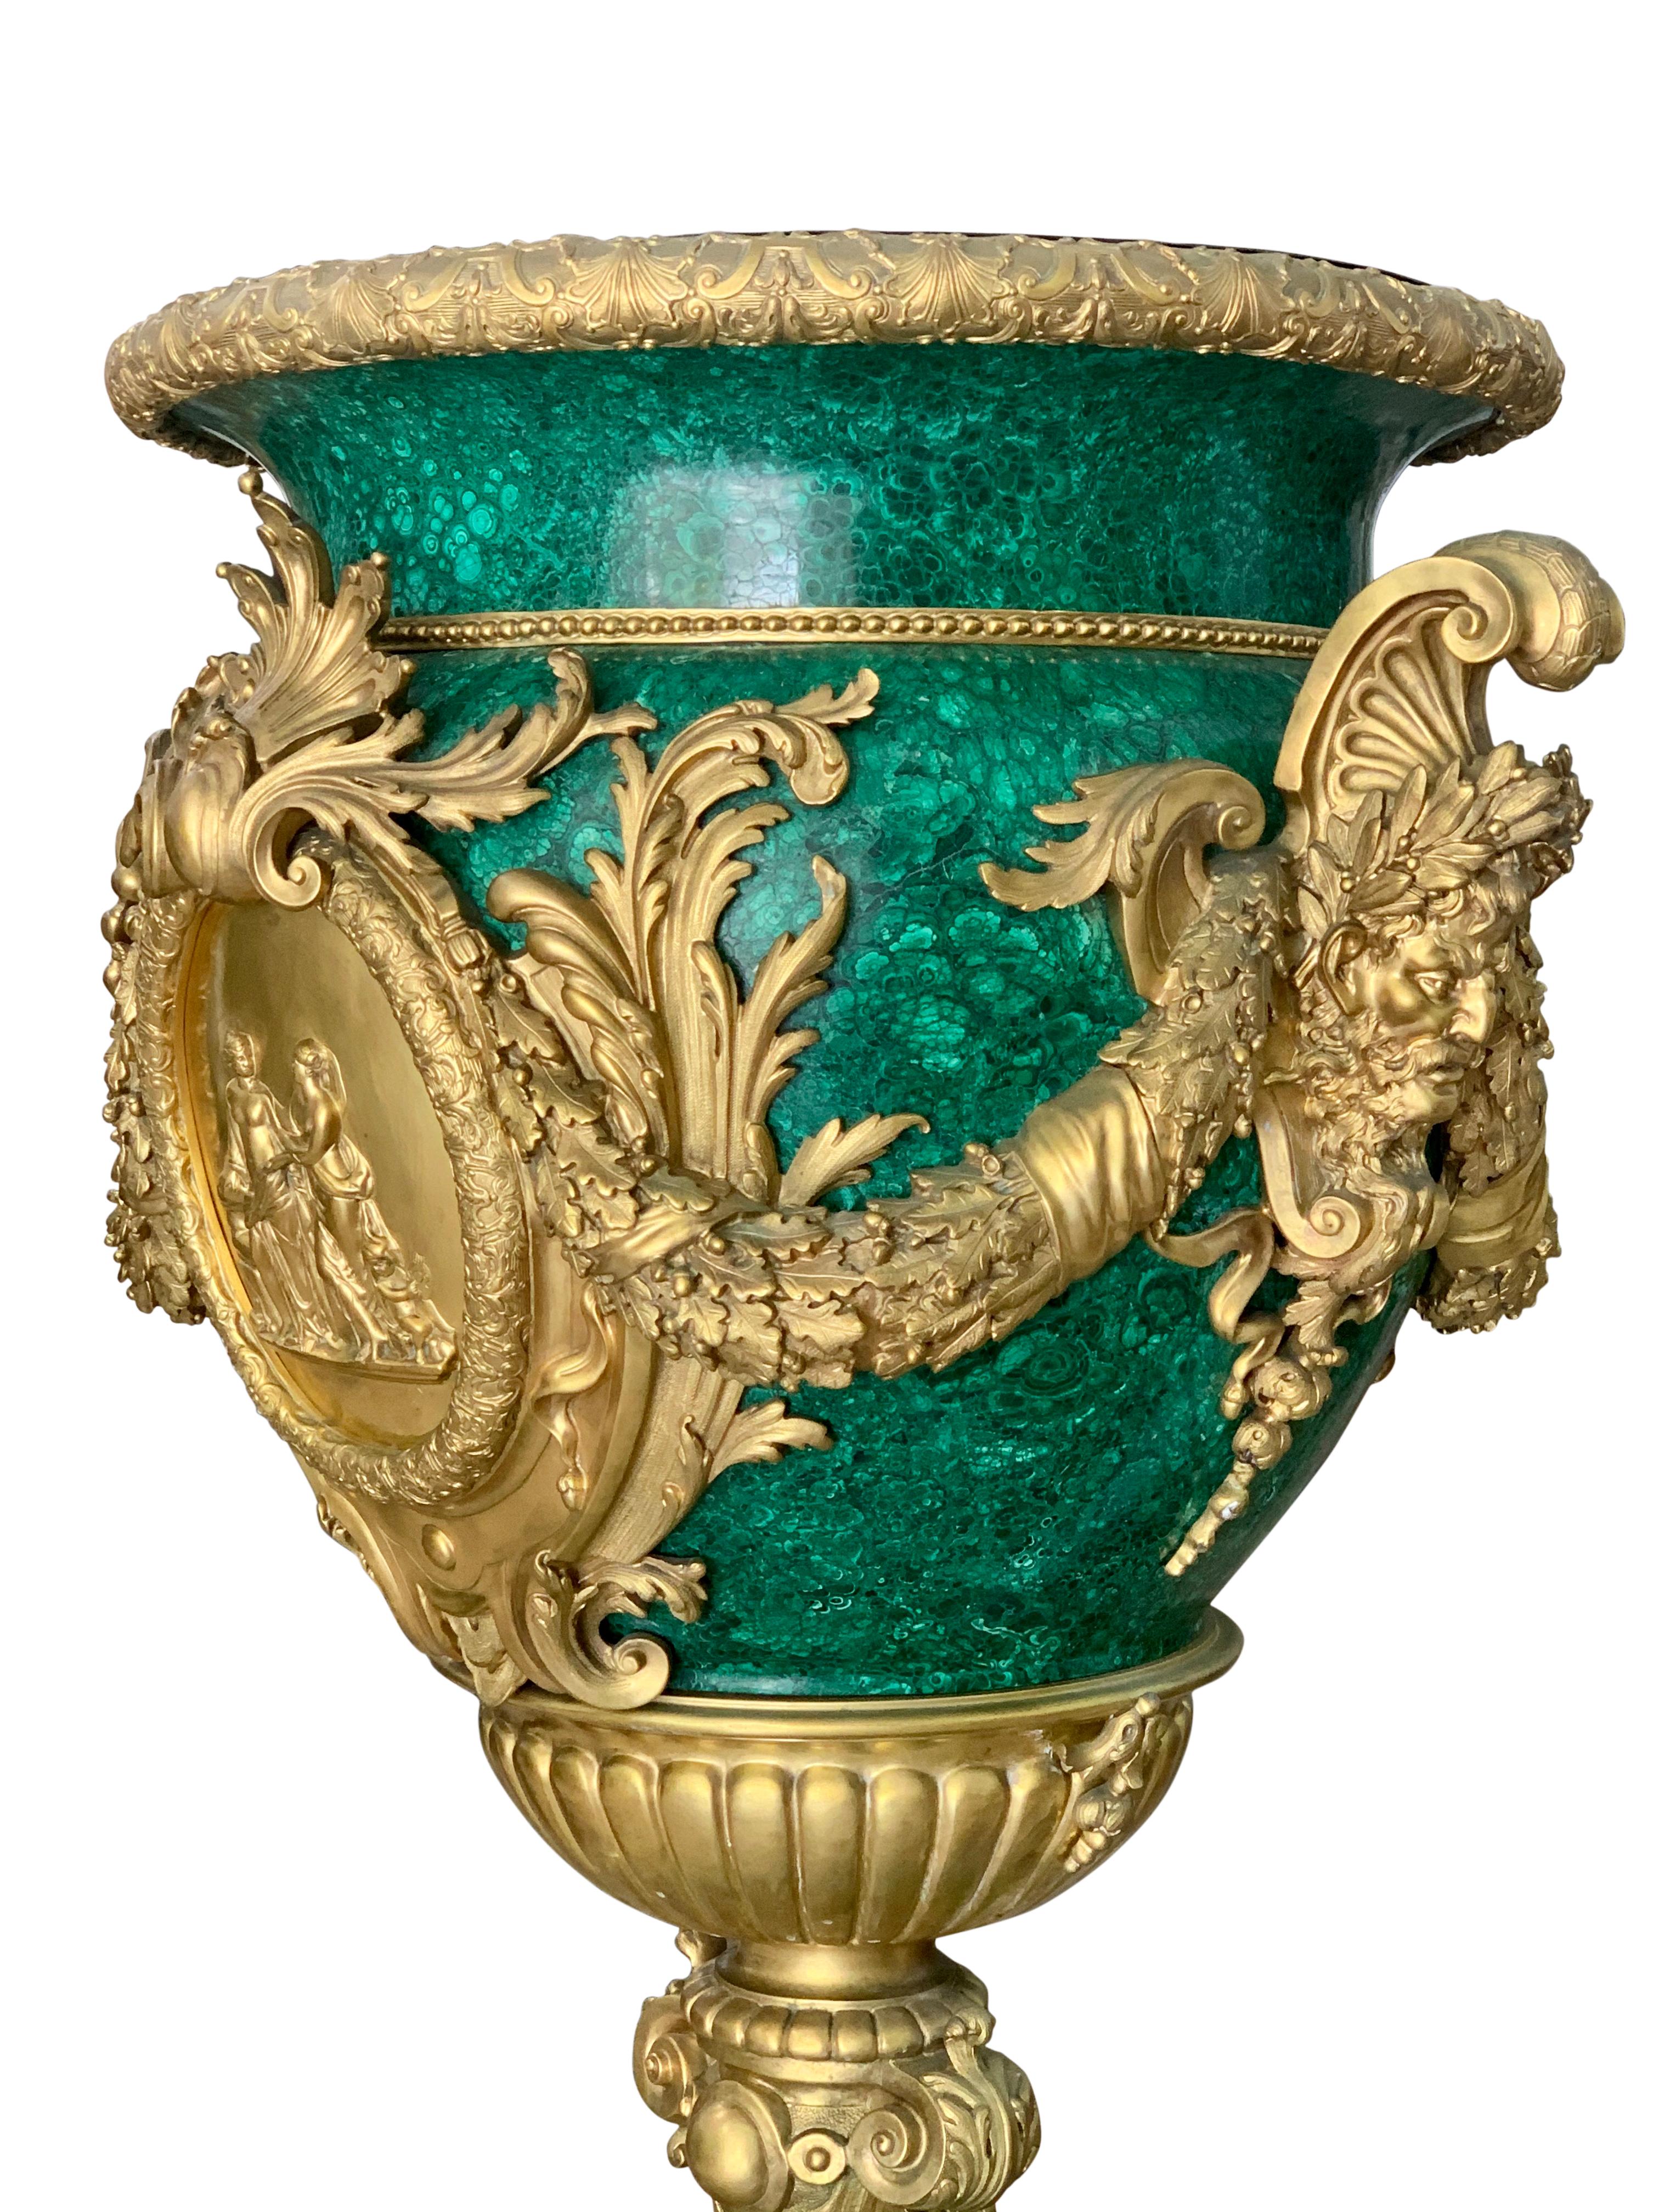 20th Century Pair of Monumental Gilt Bronze-Mounted Malachite Urns For Sale